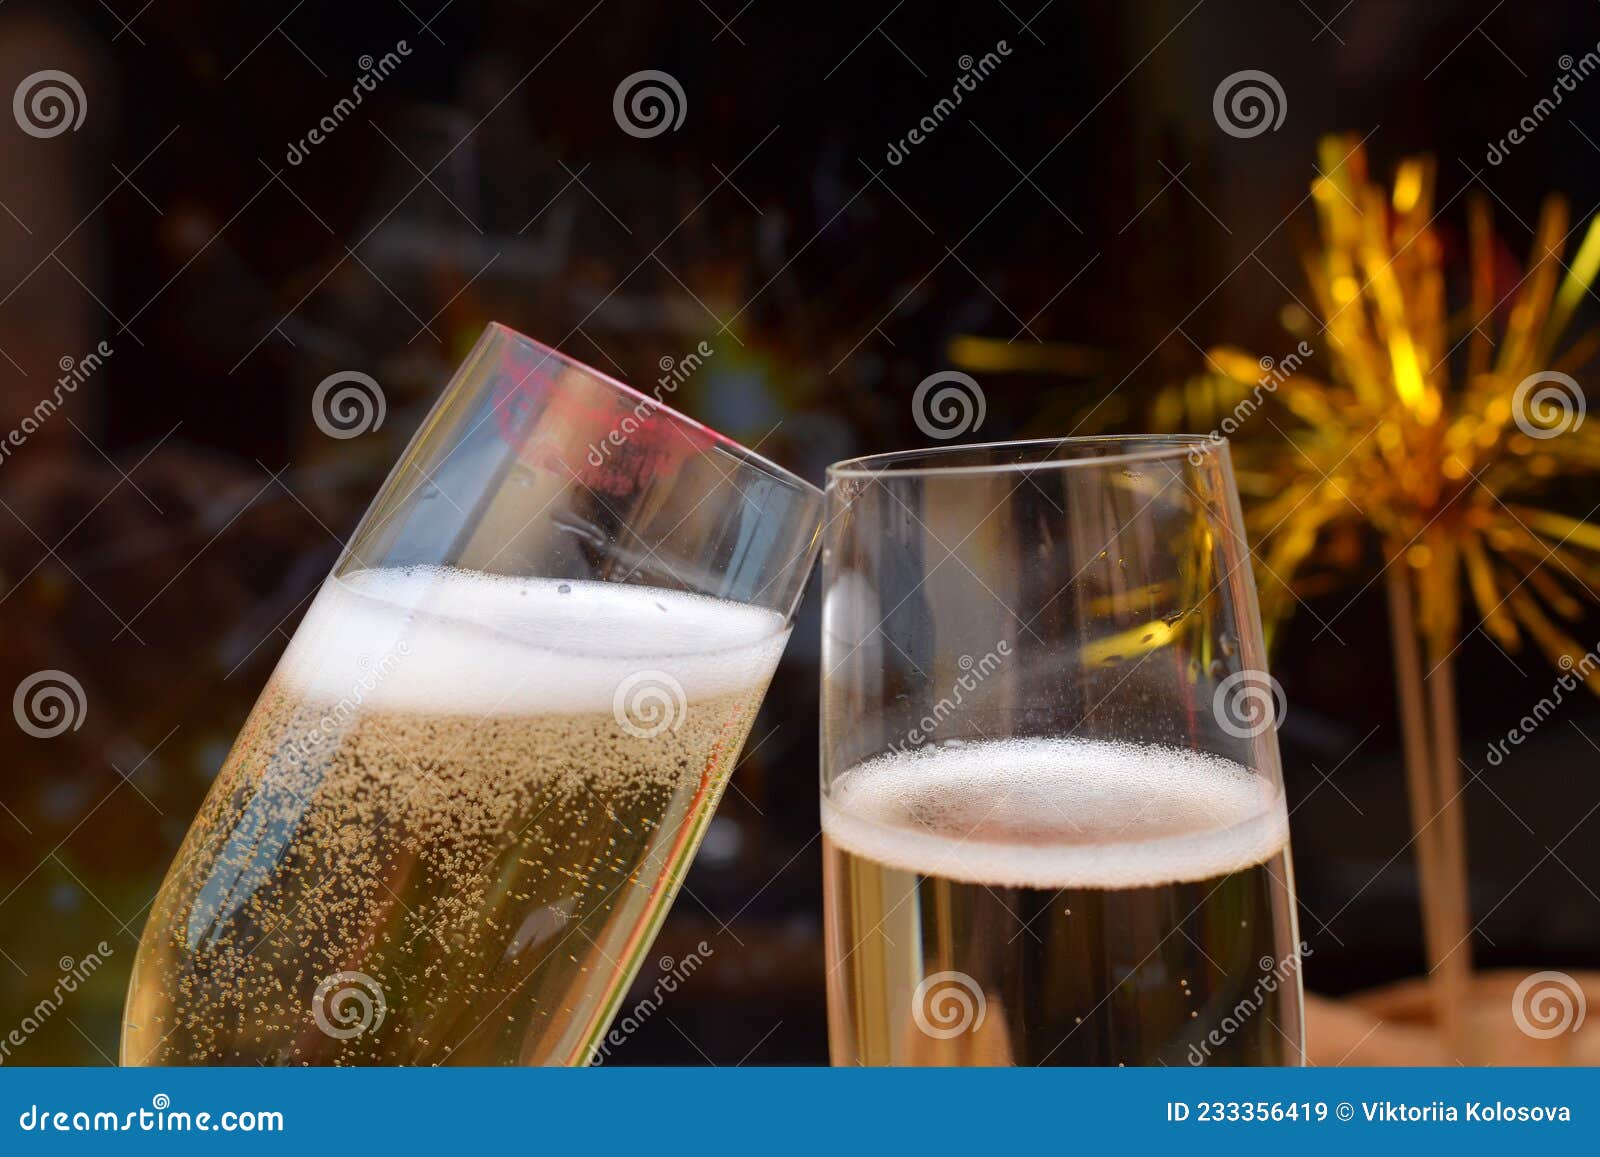 Two Glasses With Champagne Clink Glasses Stock Image Image Of Wine Glasses 233356419